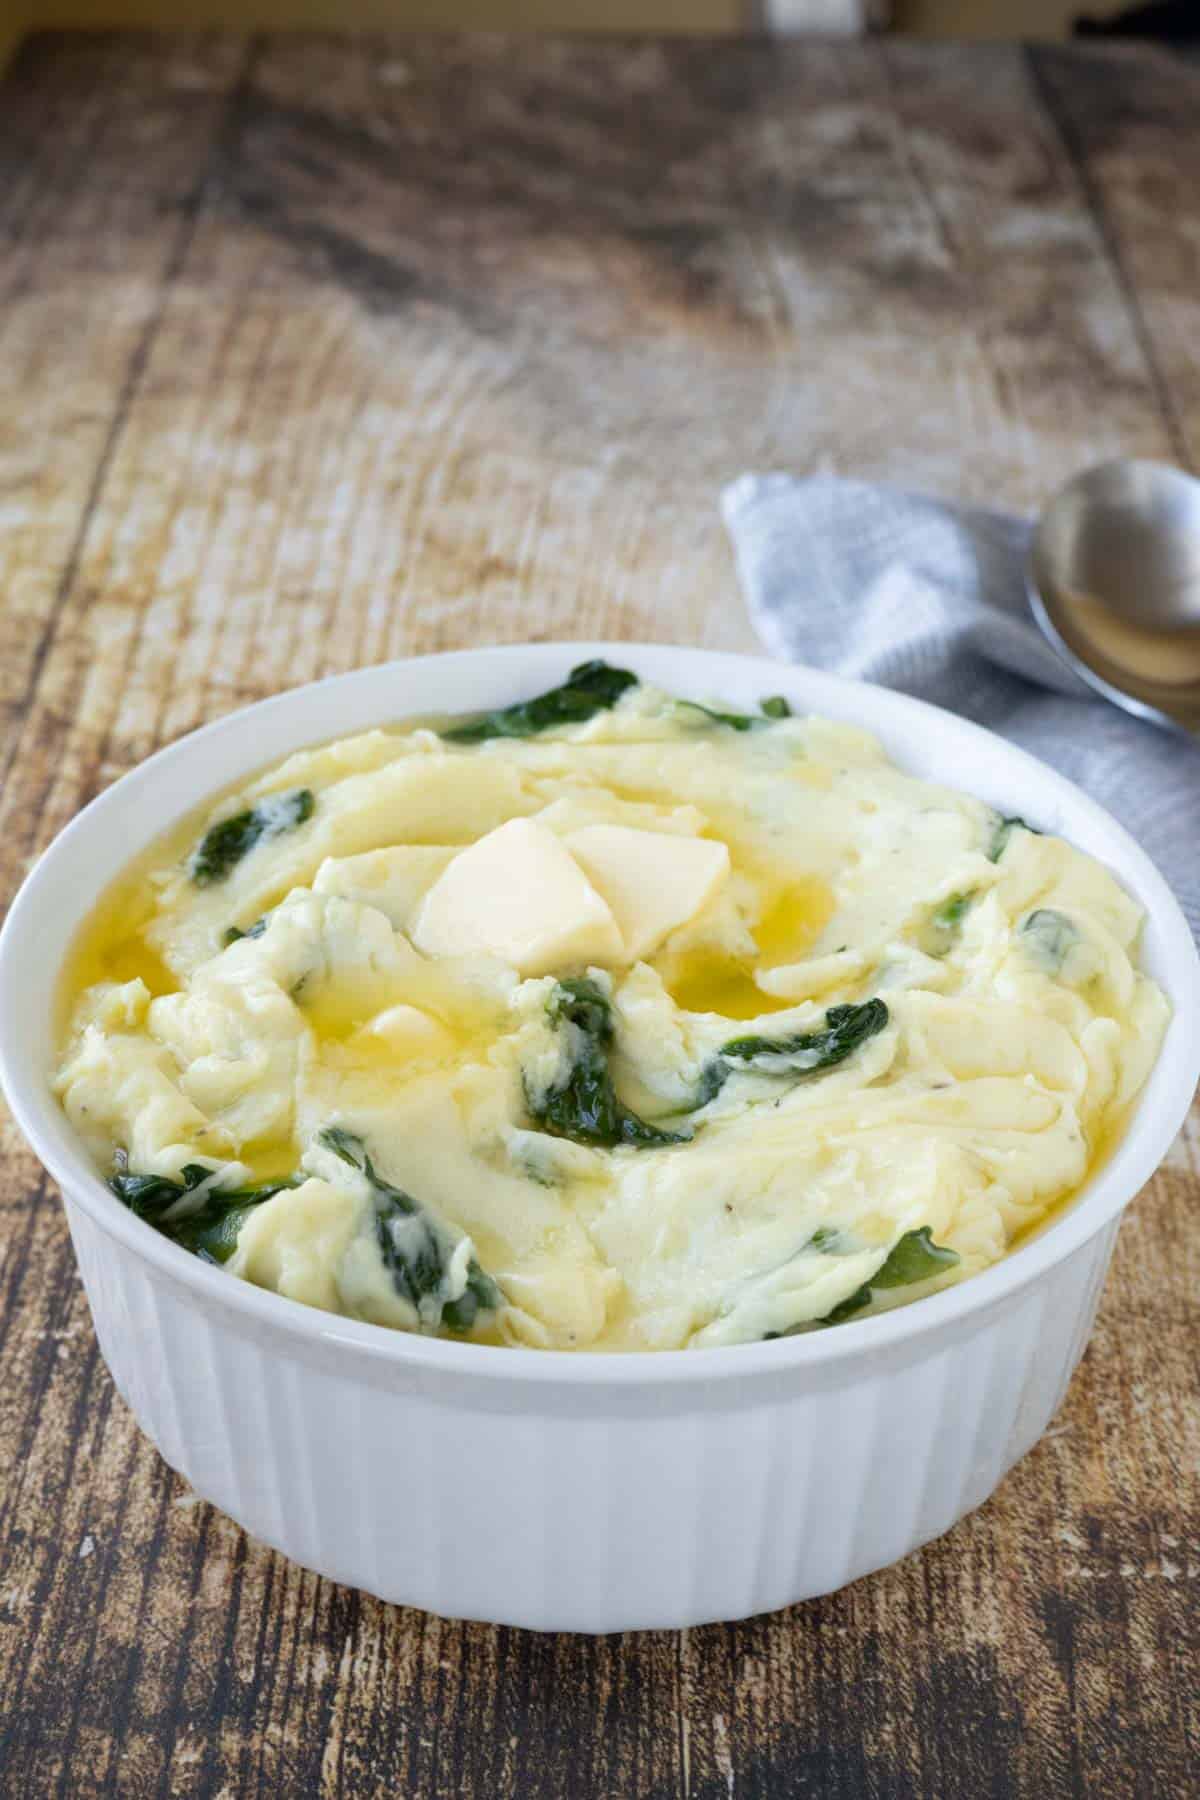 A serving dish with mashed potatoes and spinach with melted butter on top.